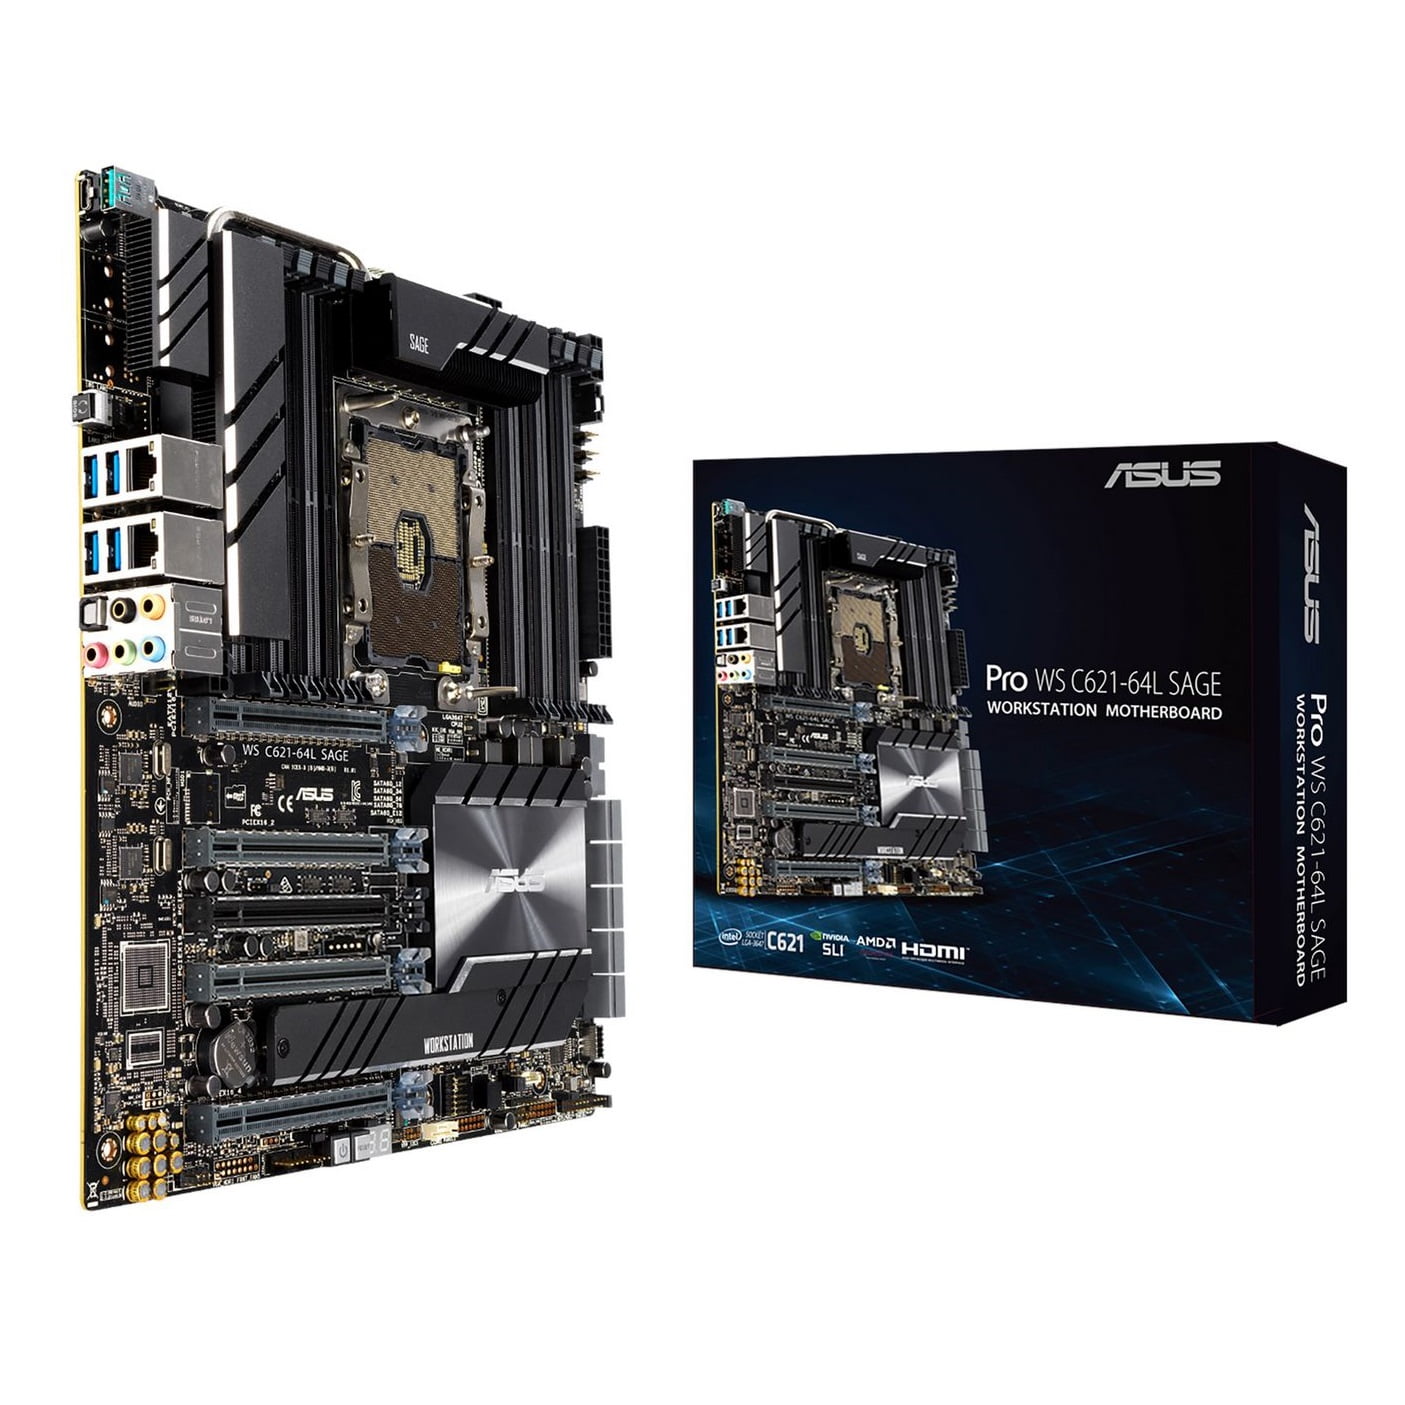 Mainboard ASUS PRO WS C621-64L SAGE - songphuong.vn